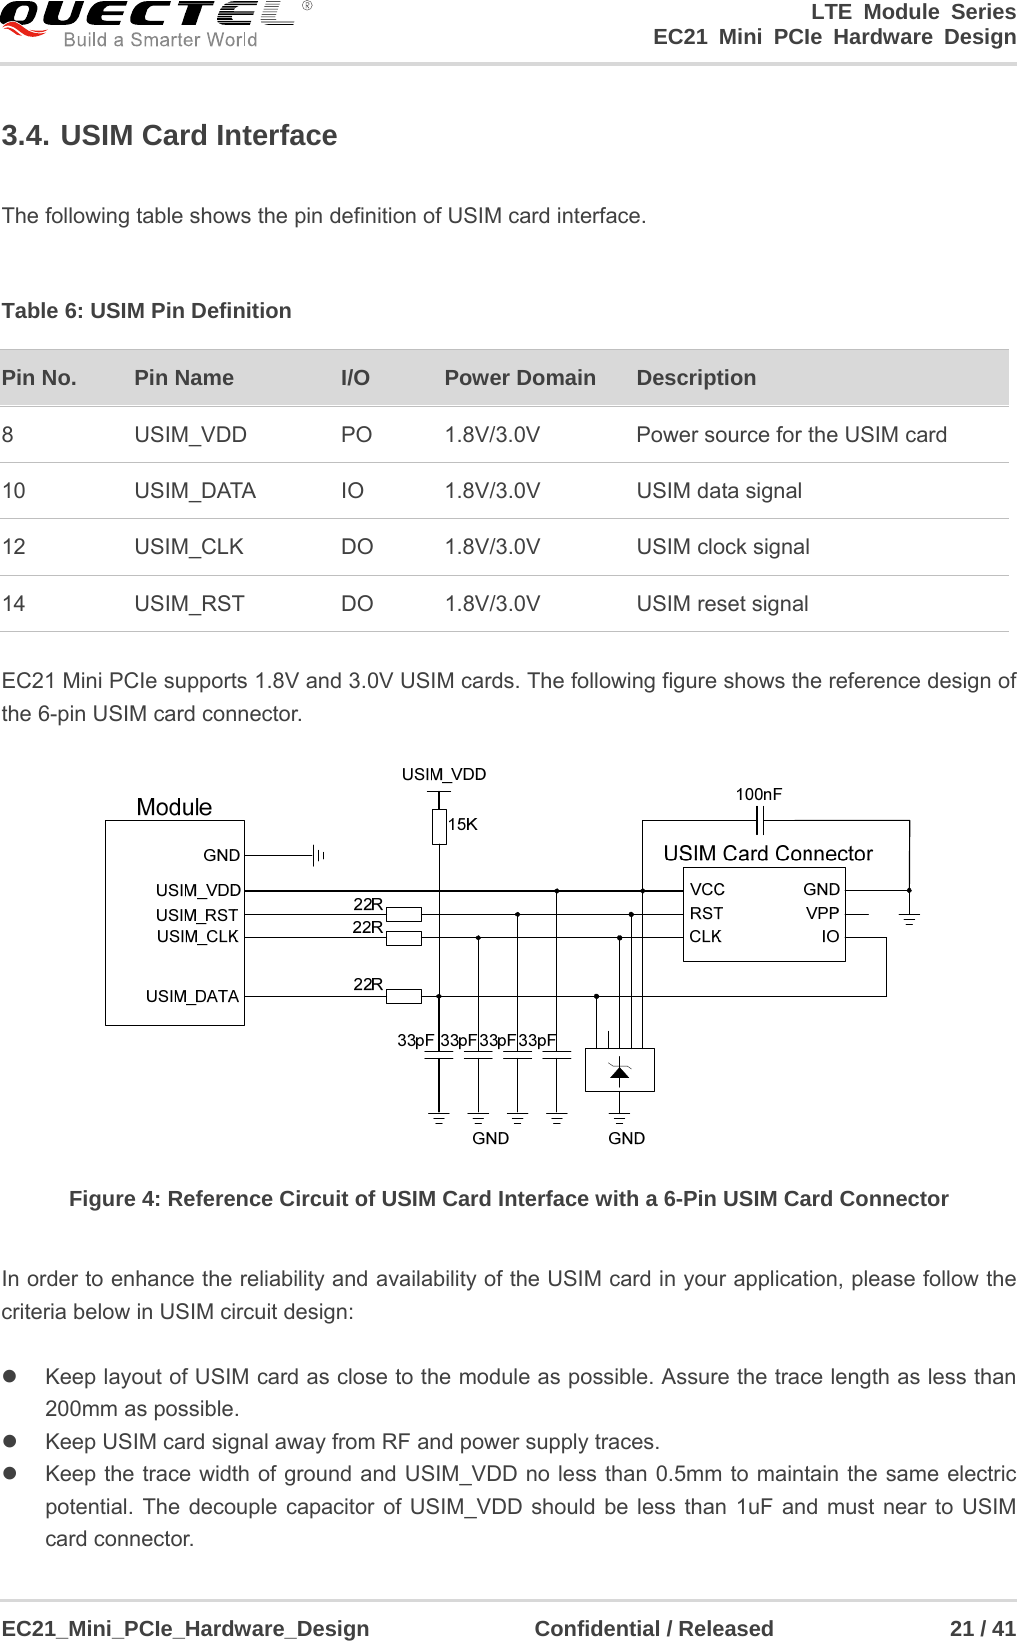                                                                        LTE Module Series                                                            EC21 Mini PCIe Hardware Design  EC21_Mini_PCIe_Hardware_Design               Confidential / Released                21 / 41    3.4. USIM Card Interface  The following table shows the pin definition of USIM card interface.  Table 6: USIM Pin Definition  EC21 Mini PCIe supports 1.8V and 3.0V USIM cards. The following figure shows the reference design of the 6-pin USIM card connector.  Figure 4: Reference Circuit of USIM Card Interface with a 6-Pin USIM Card Connector  In order to enhance the reliability and availability of the USIM card in your application, please follow the criteria below in USIM circuit design:    Keep layout of USIM card as close to the module as possible. Assure the trace length as less than 200mm as possible.     Keep USIM card signal away from RF and power supply traces.   Keep the trace width of ground and USIM_VDD no less than 0.5mm to maintain the same electric potential. The decouple capacitor of USIM_VDD should be less than 1uF and must near to USIM card connector. Pin No.  Pin Name I/O  Power Domain    Description 8 USIM_VDD PO       1.8V/3.0V         Power source for the USIM card 10 USIM_DATA IO 1.8V/3.0V USIM data signal 12 USIM_CLK DO 1.8V/3.0V USIM clock signal 14 USIM_RST DO       1.8V/3.0V USIM reset signal 